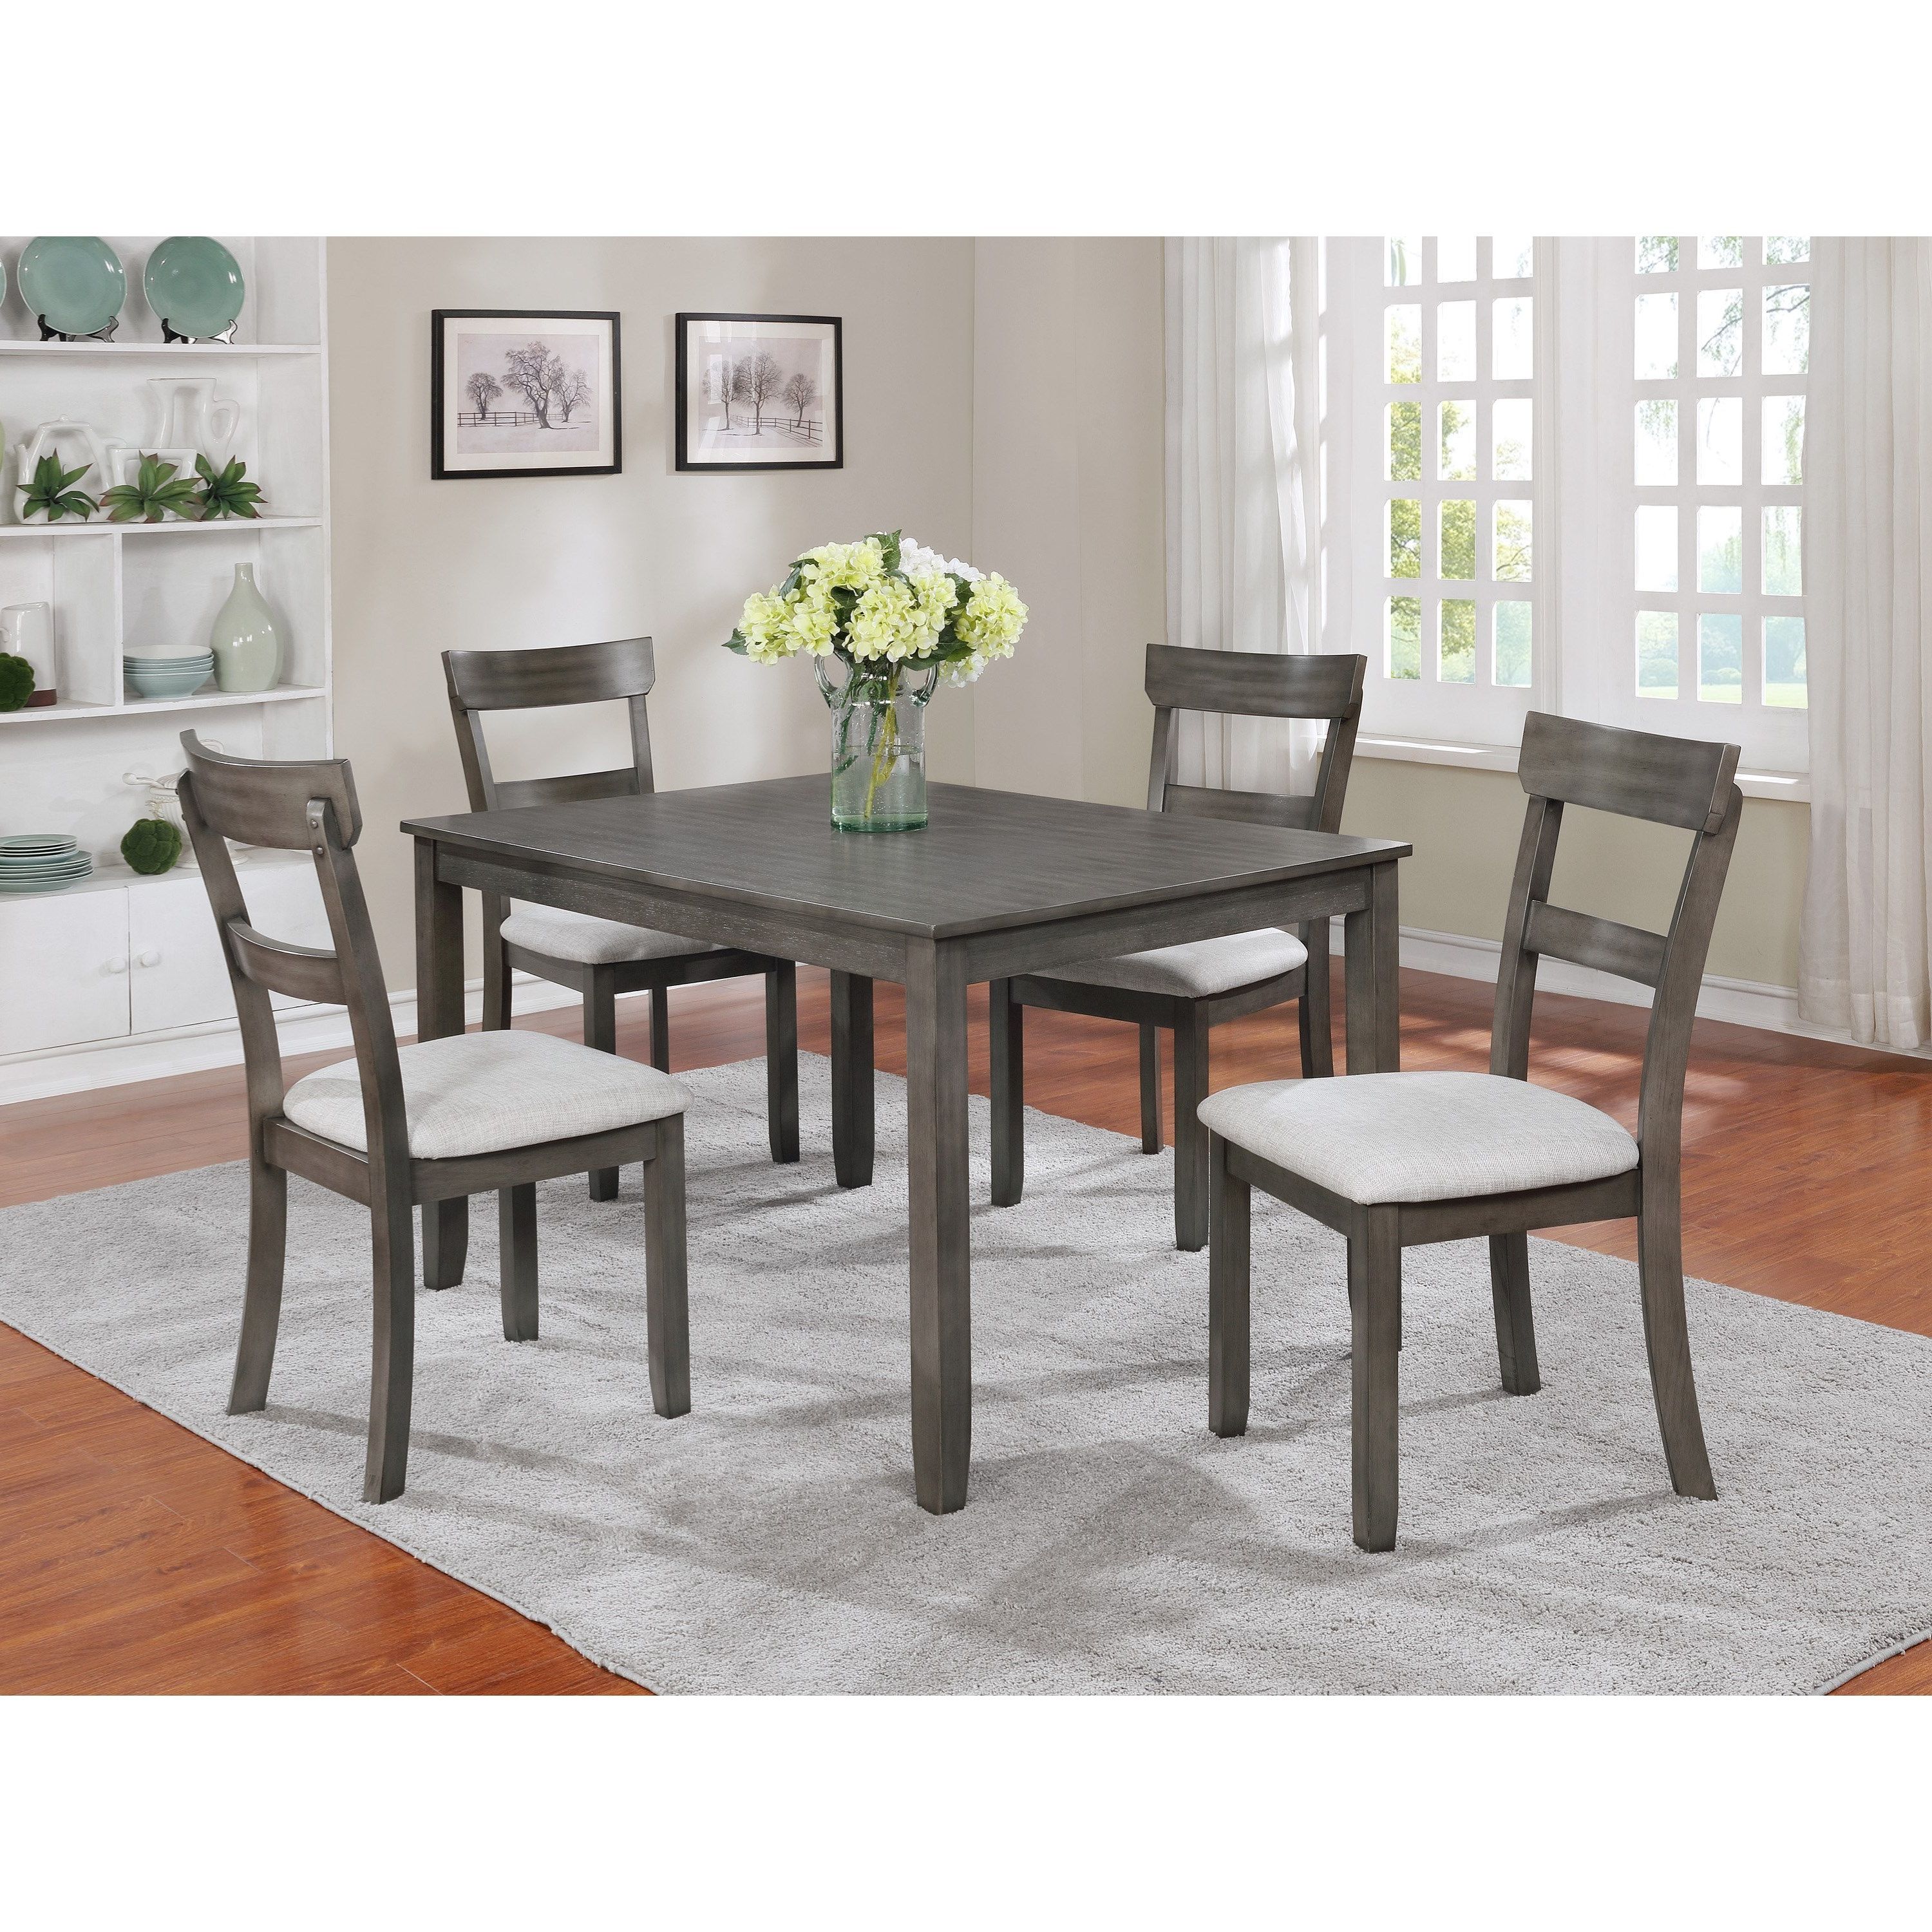 Crown Mark Henderson 2254set Gy 5 Piece Dining Table And Chair Set With Regard To Well Liked 5 Piece Dining Sets (Photo 1 of 25)